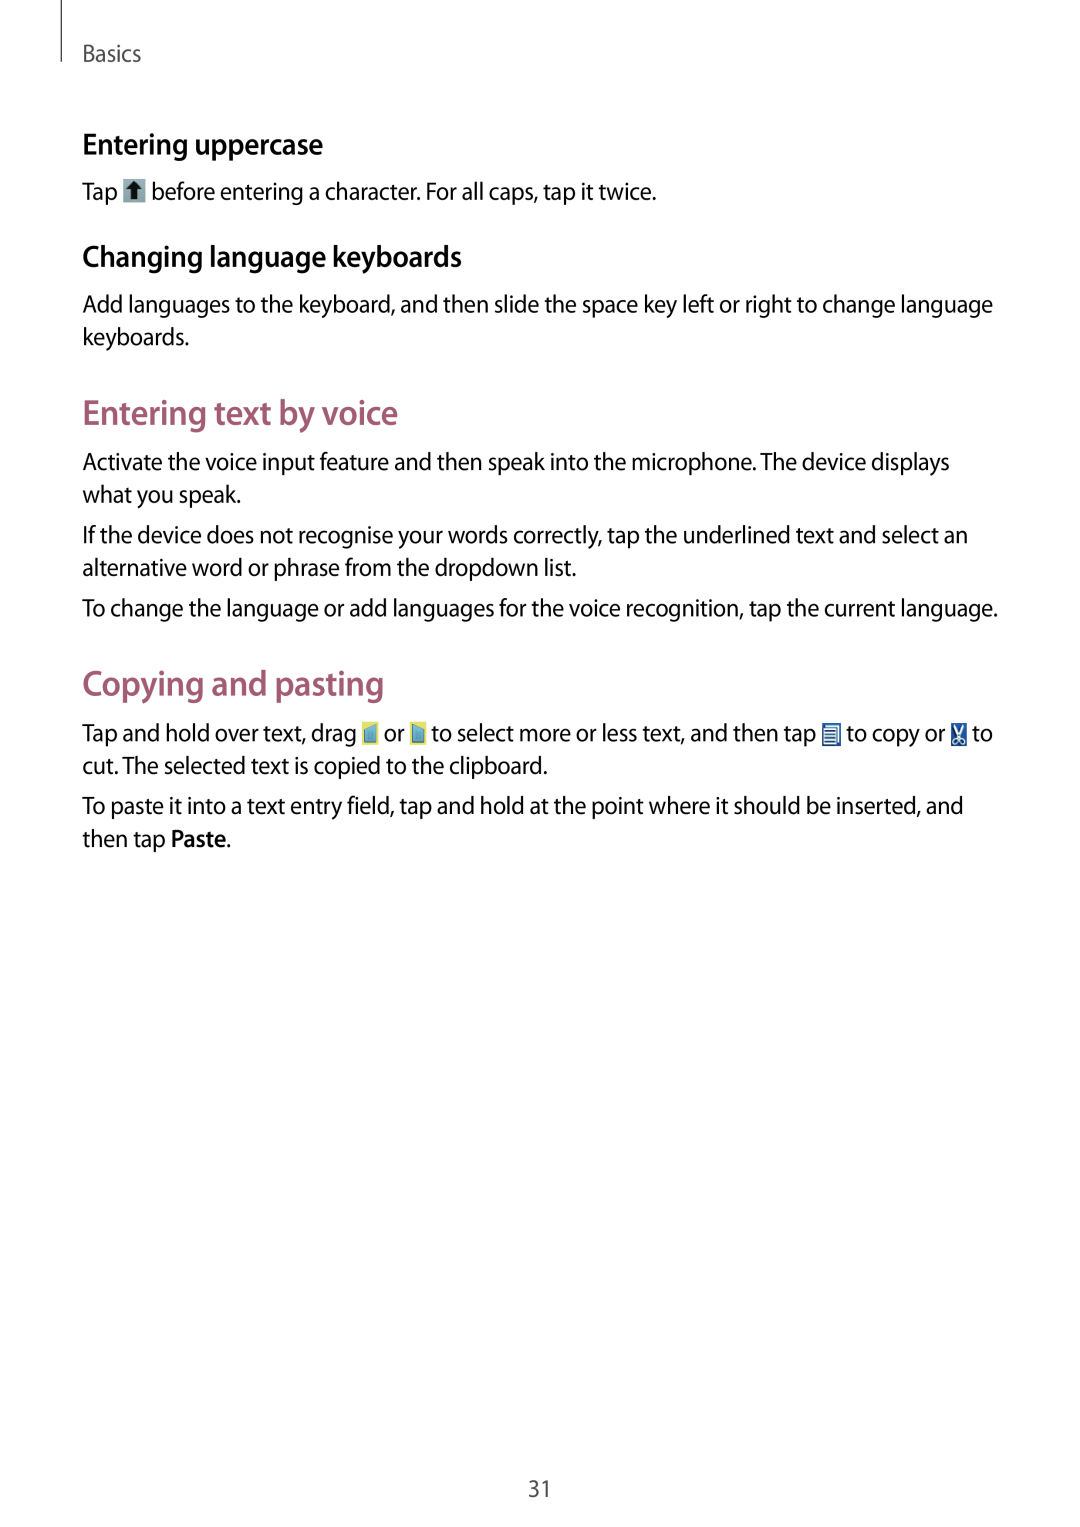 Samsung GT-S6790PWNEUR manual Entering text by voice, Copying and pasting, Entering uppercase, Changing language keyboards 